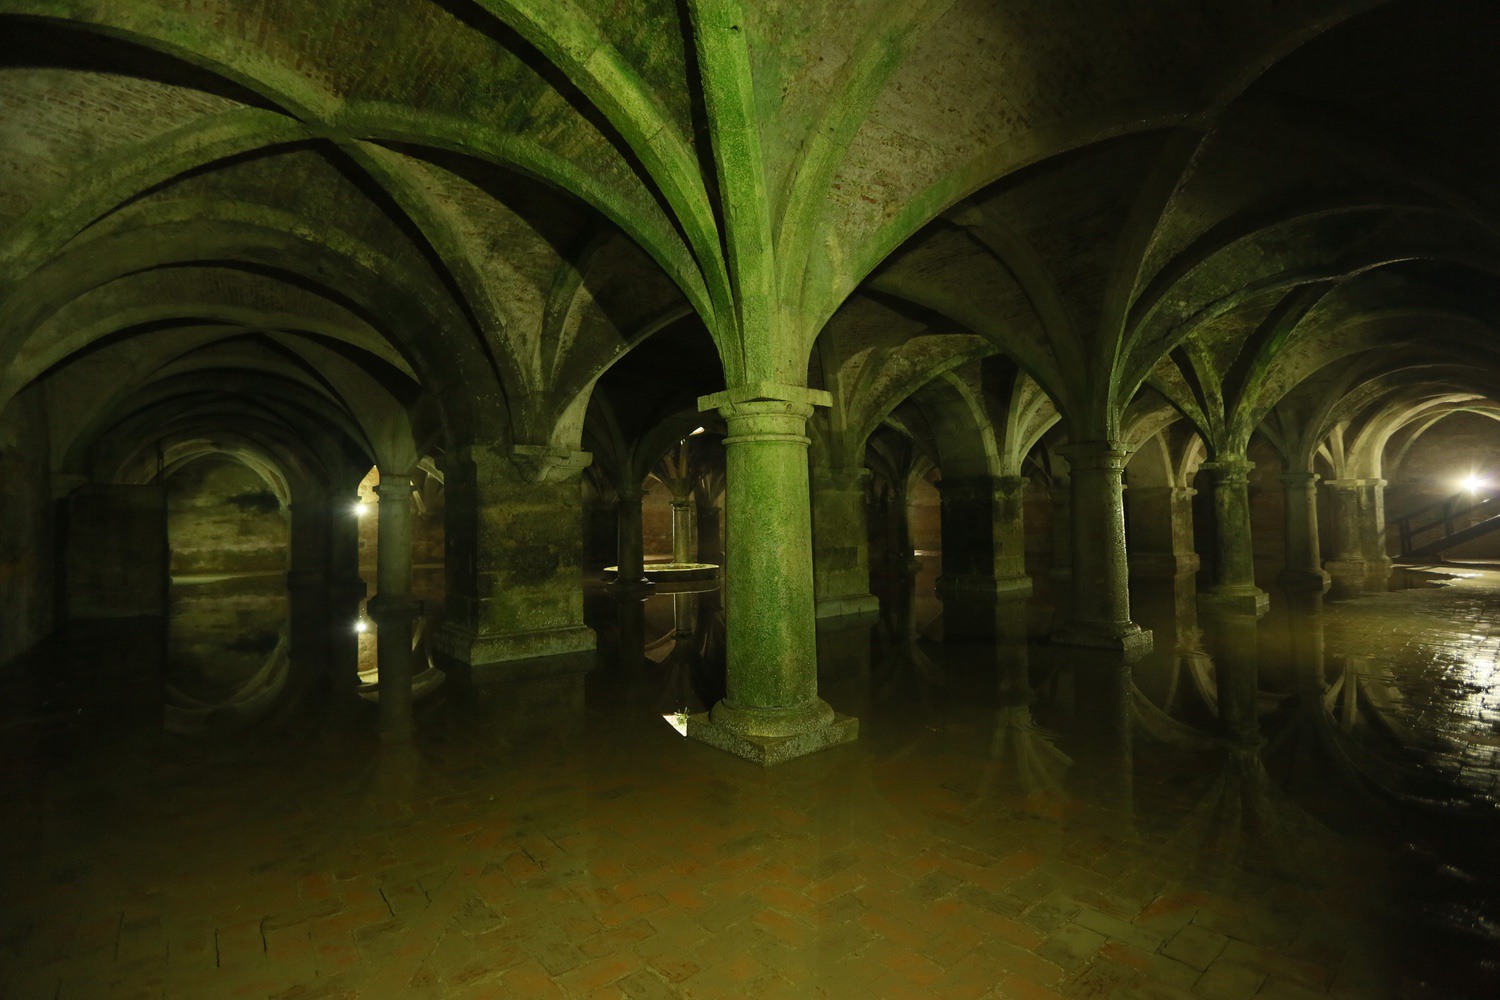 Cistern - Interior view with columns and piers